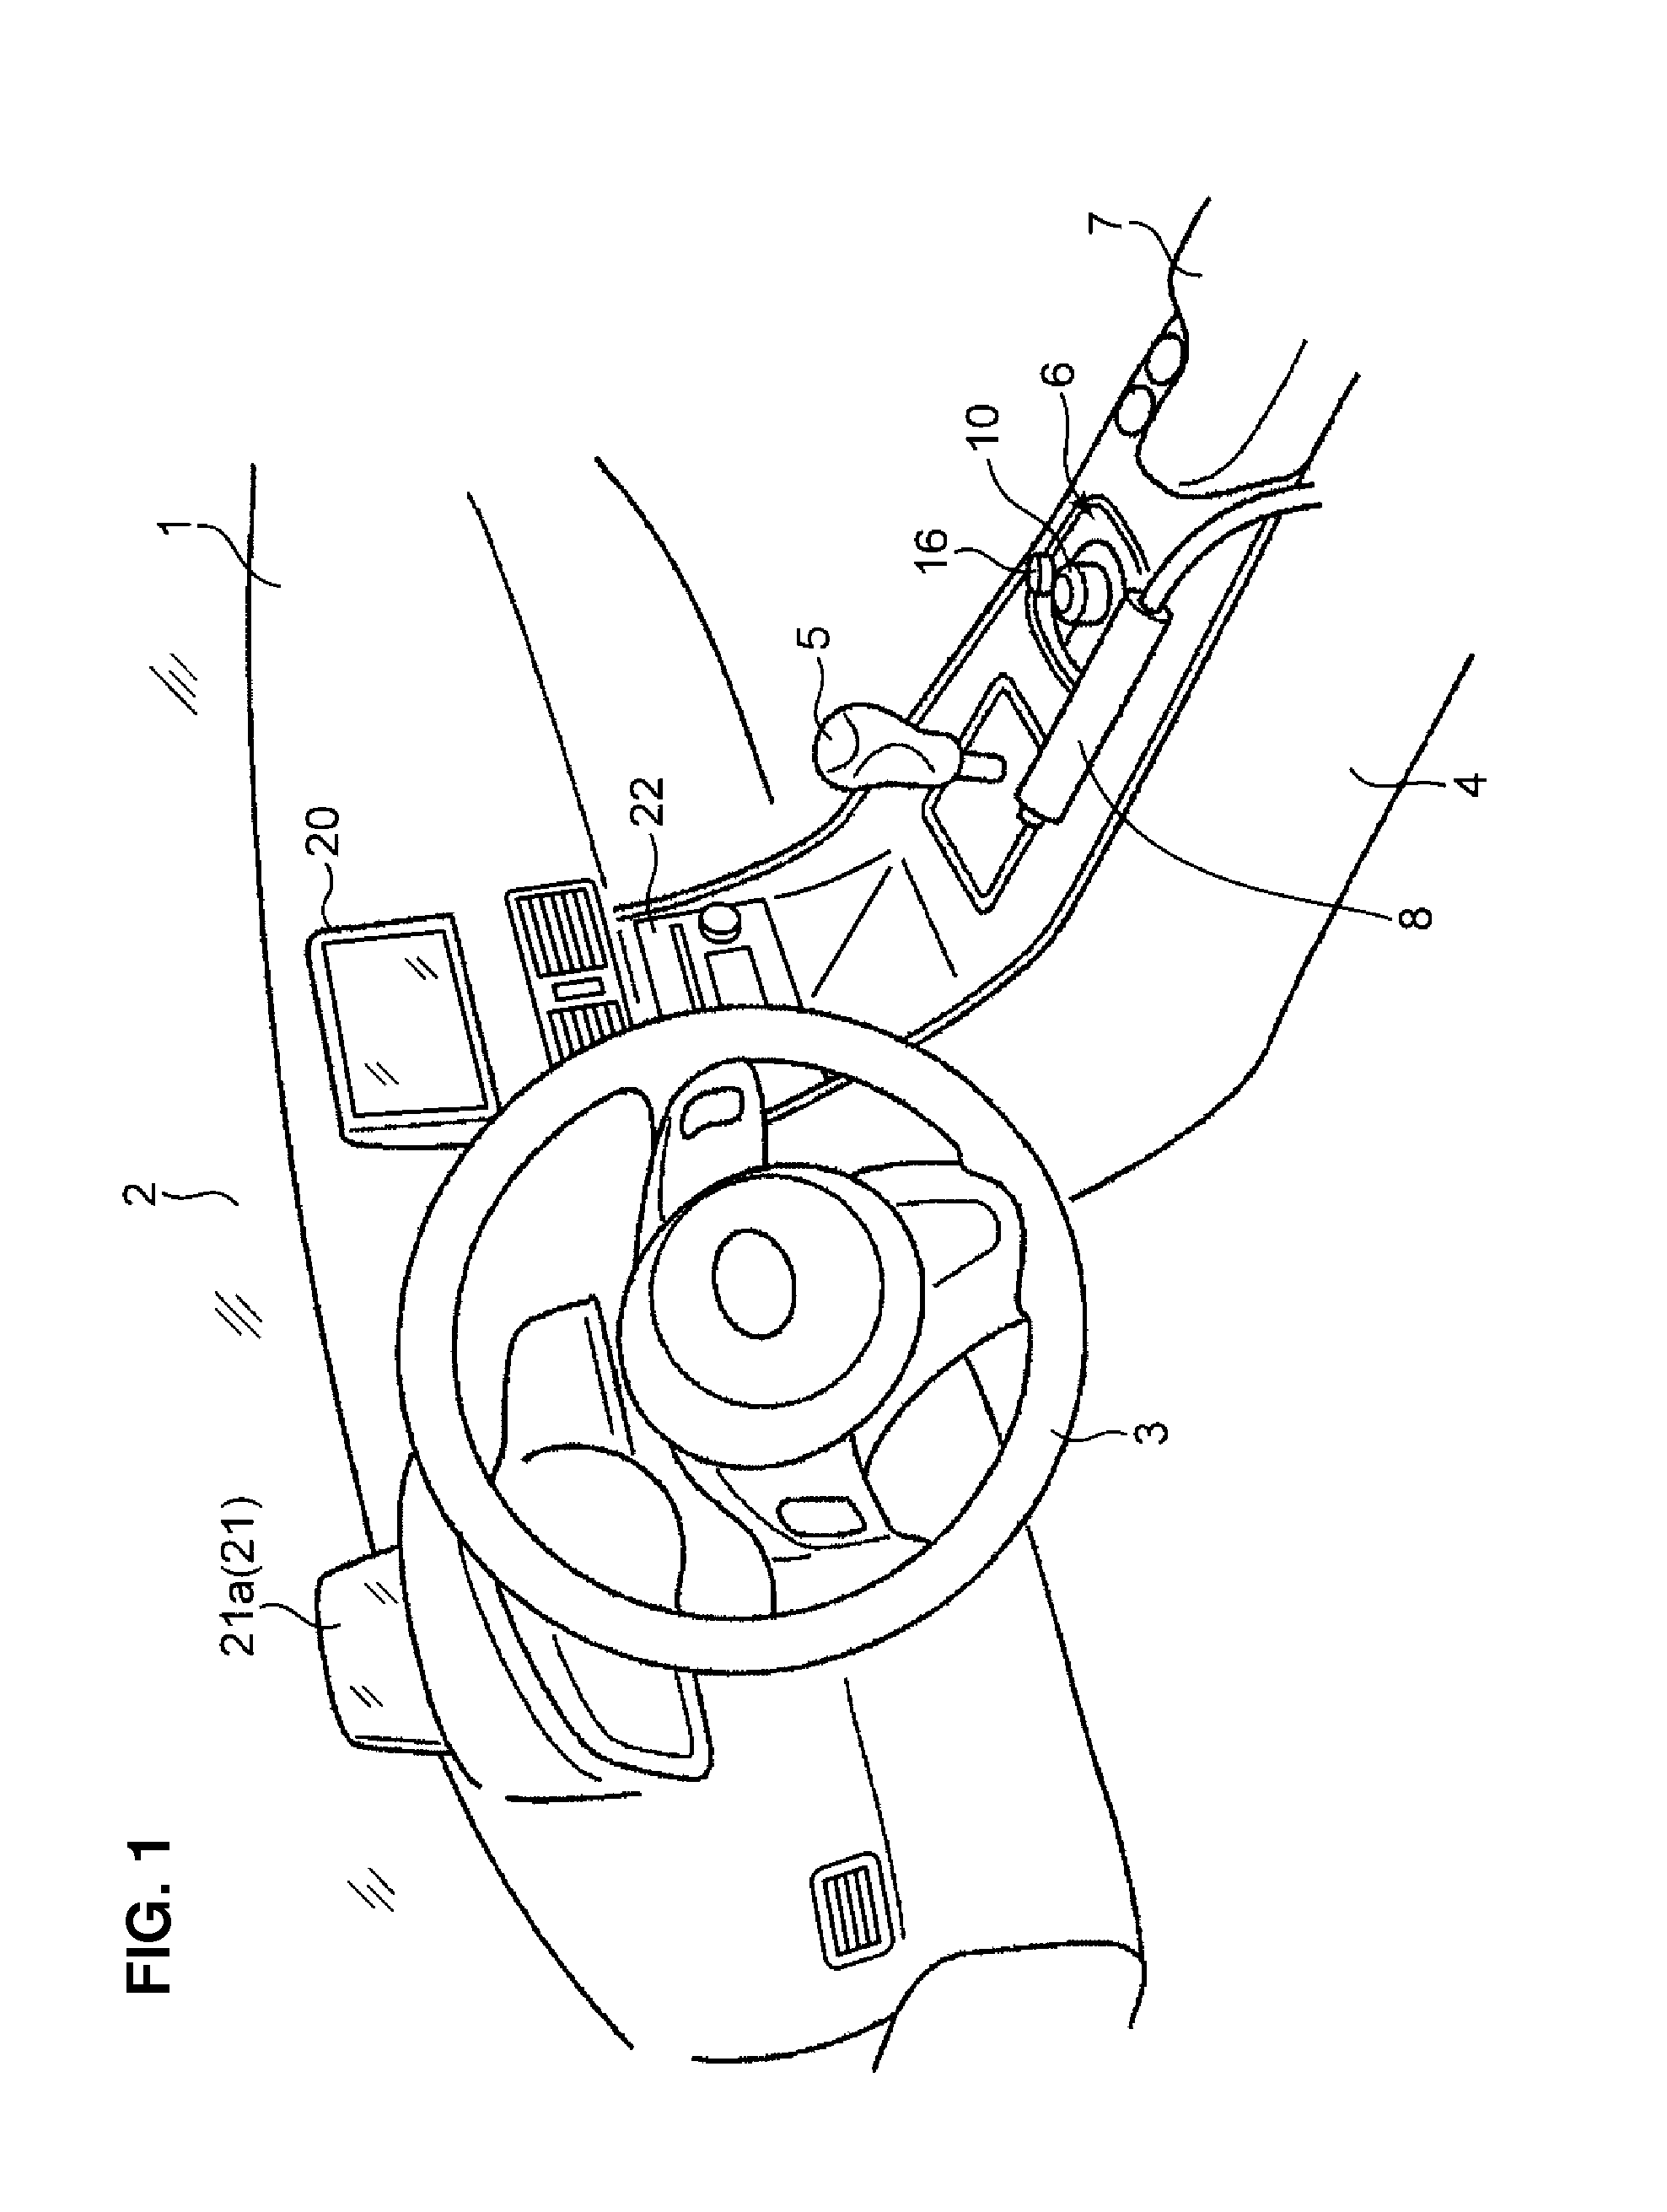 Information display device for vehicle